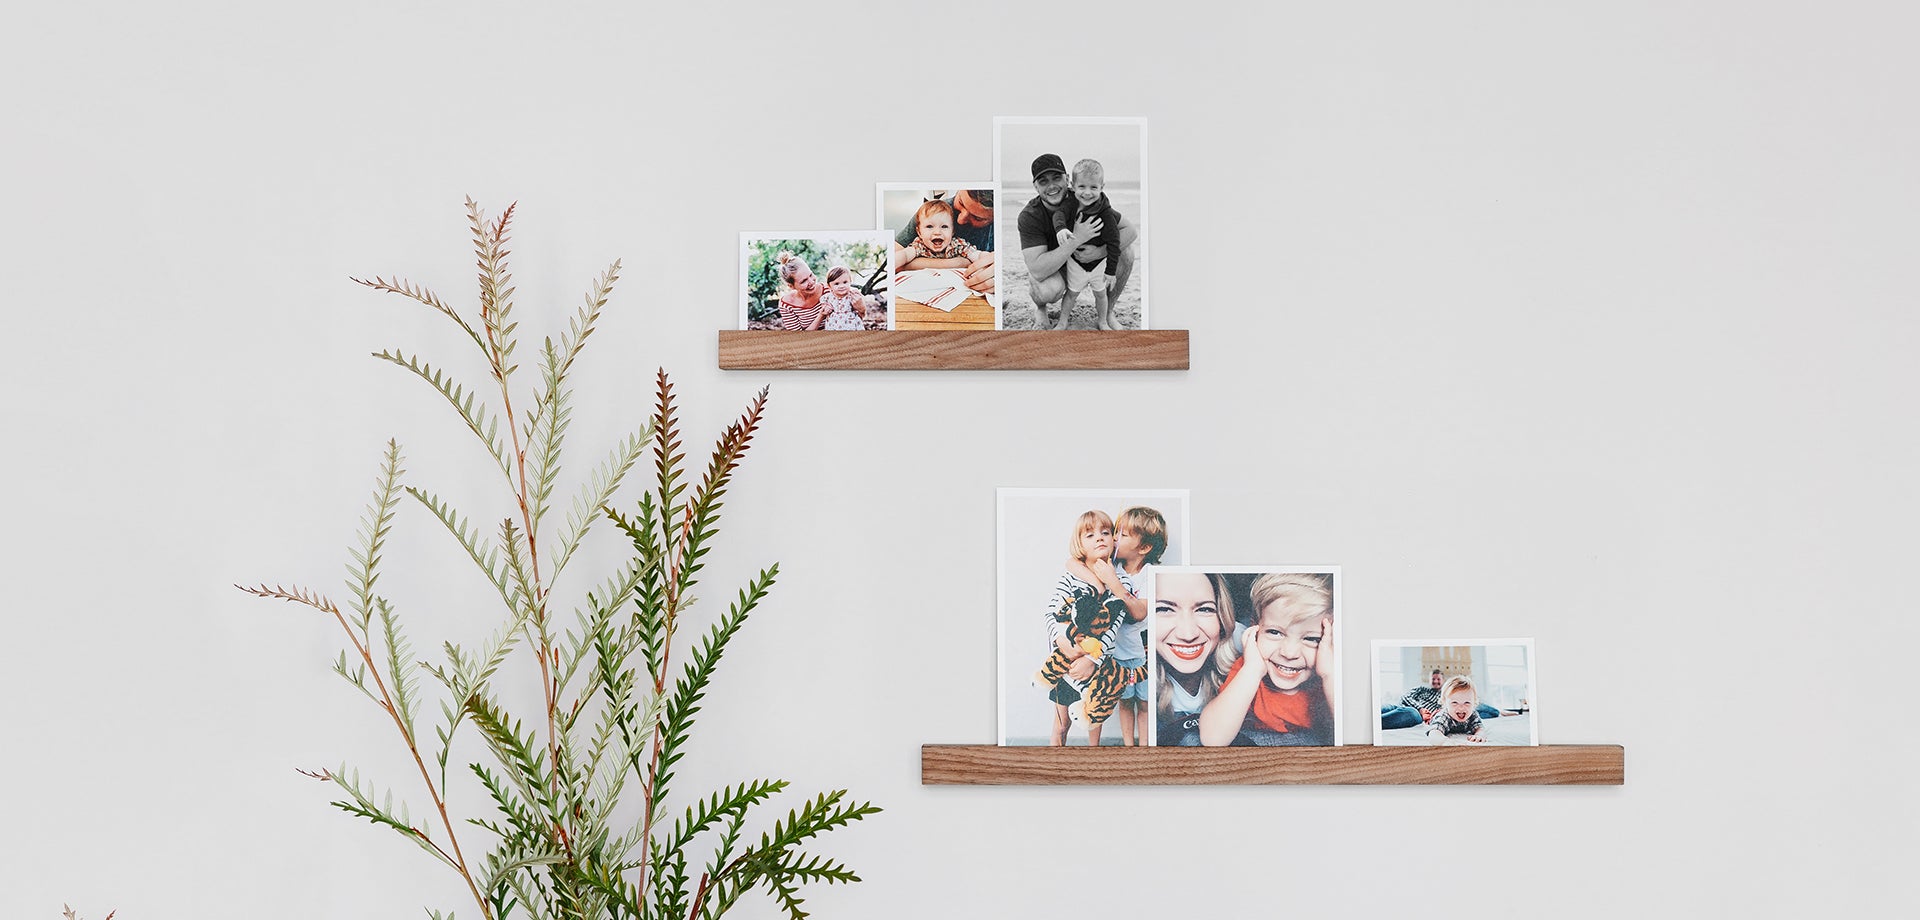 Photo display ideas in action in the form of prints on a wooden photo ledge